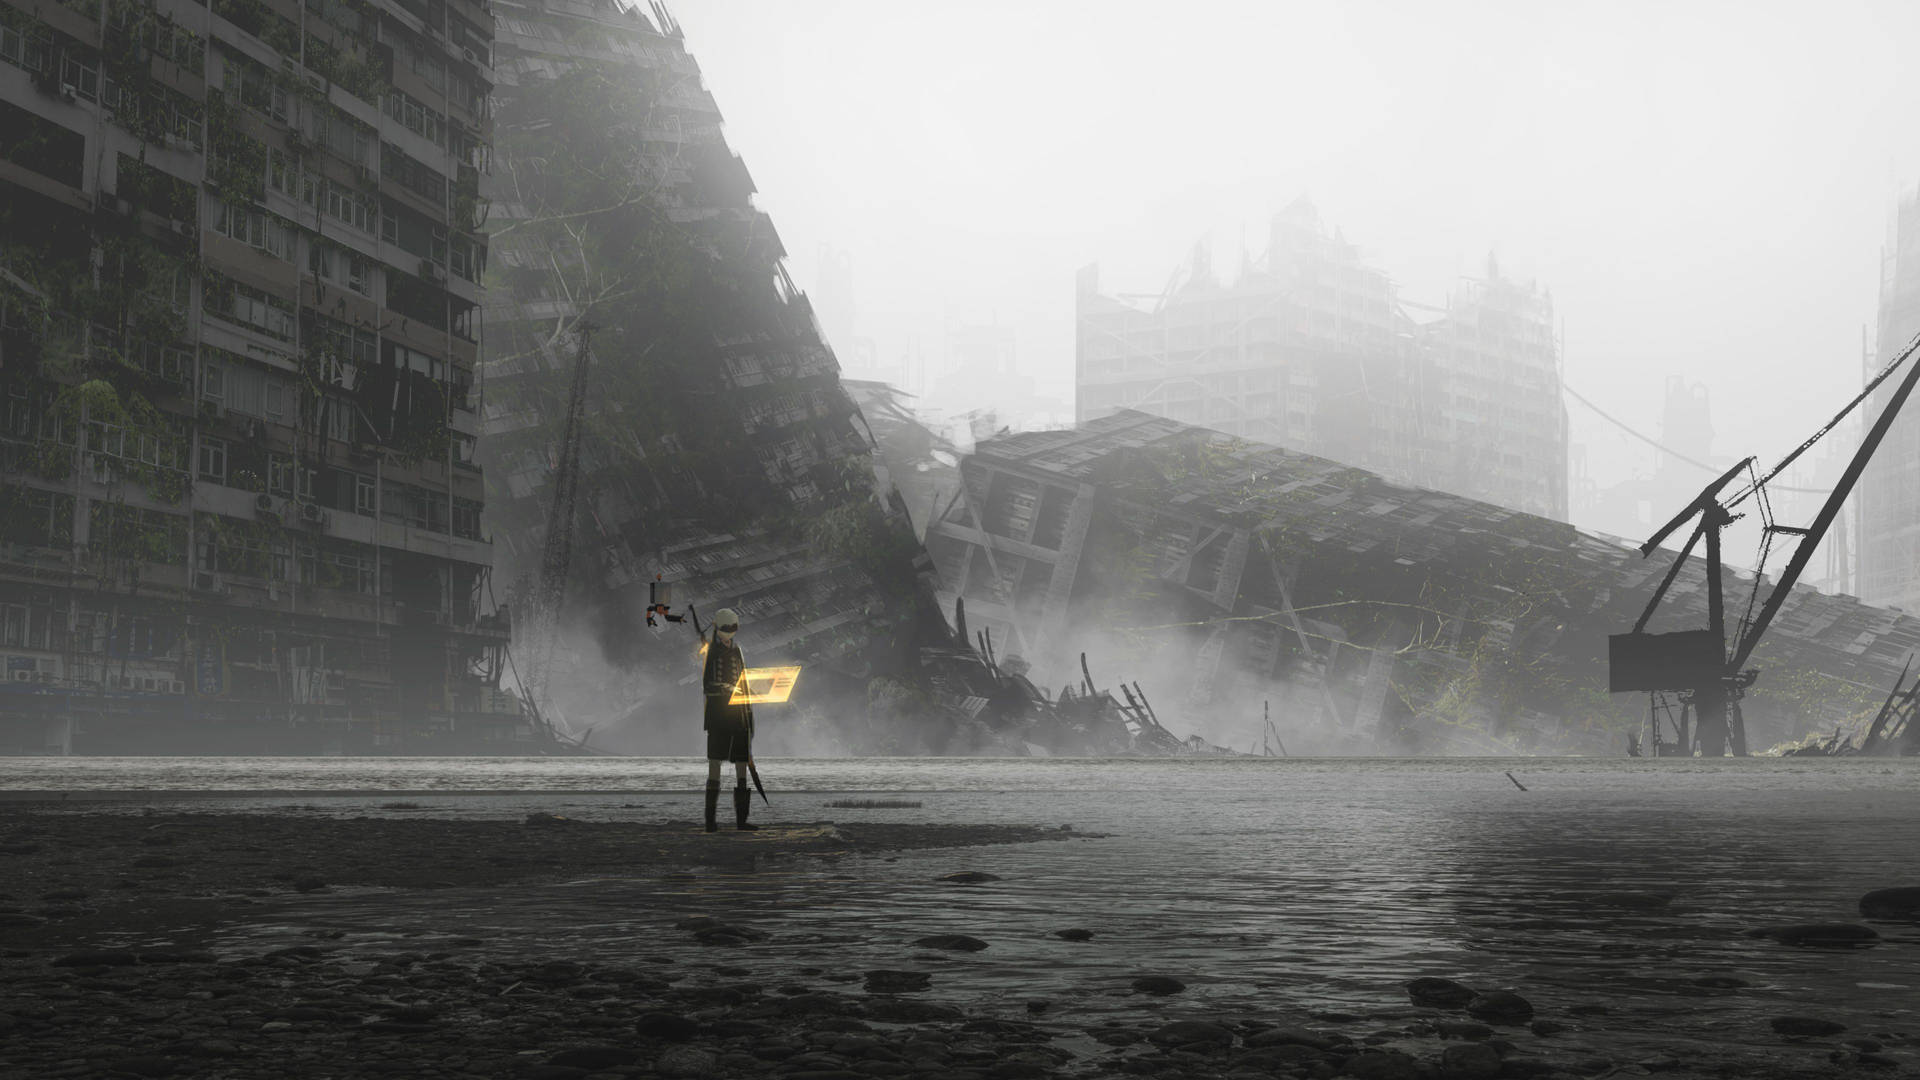 Nier Automata Ruined City Background Background